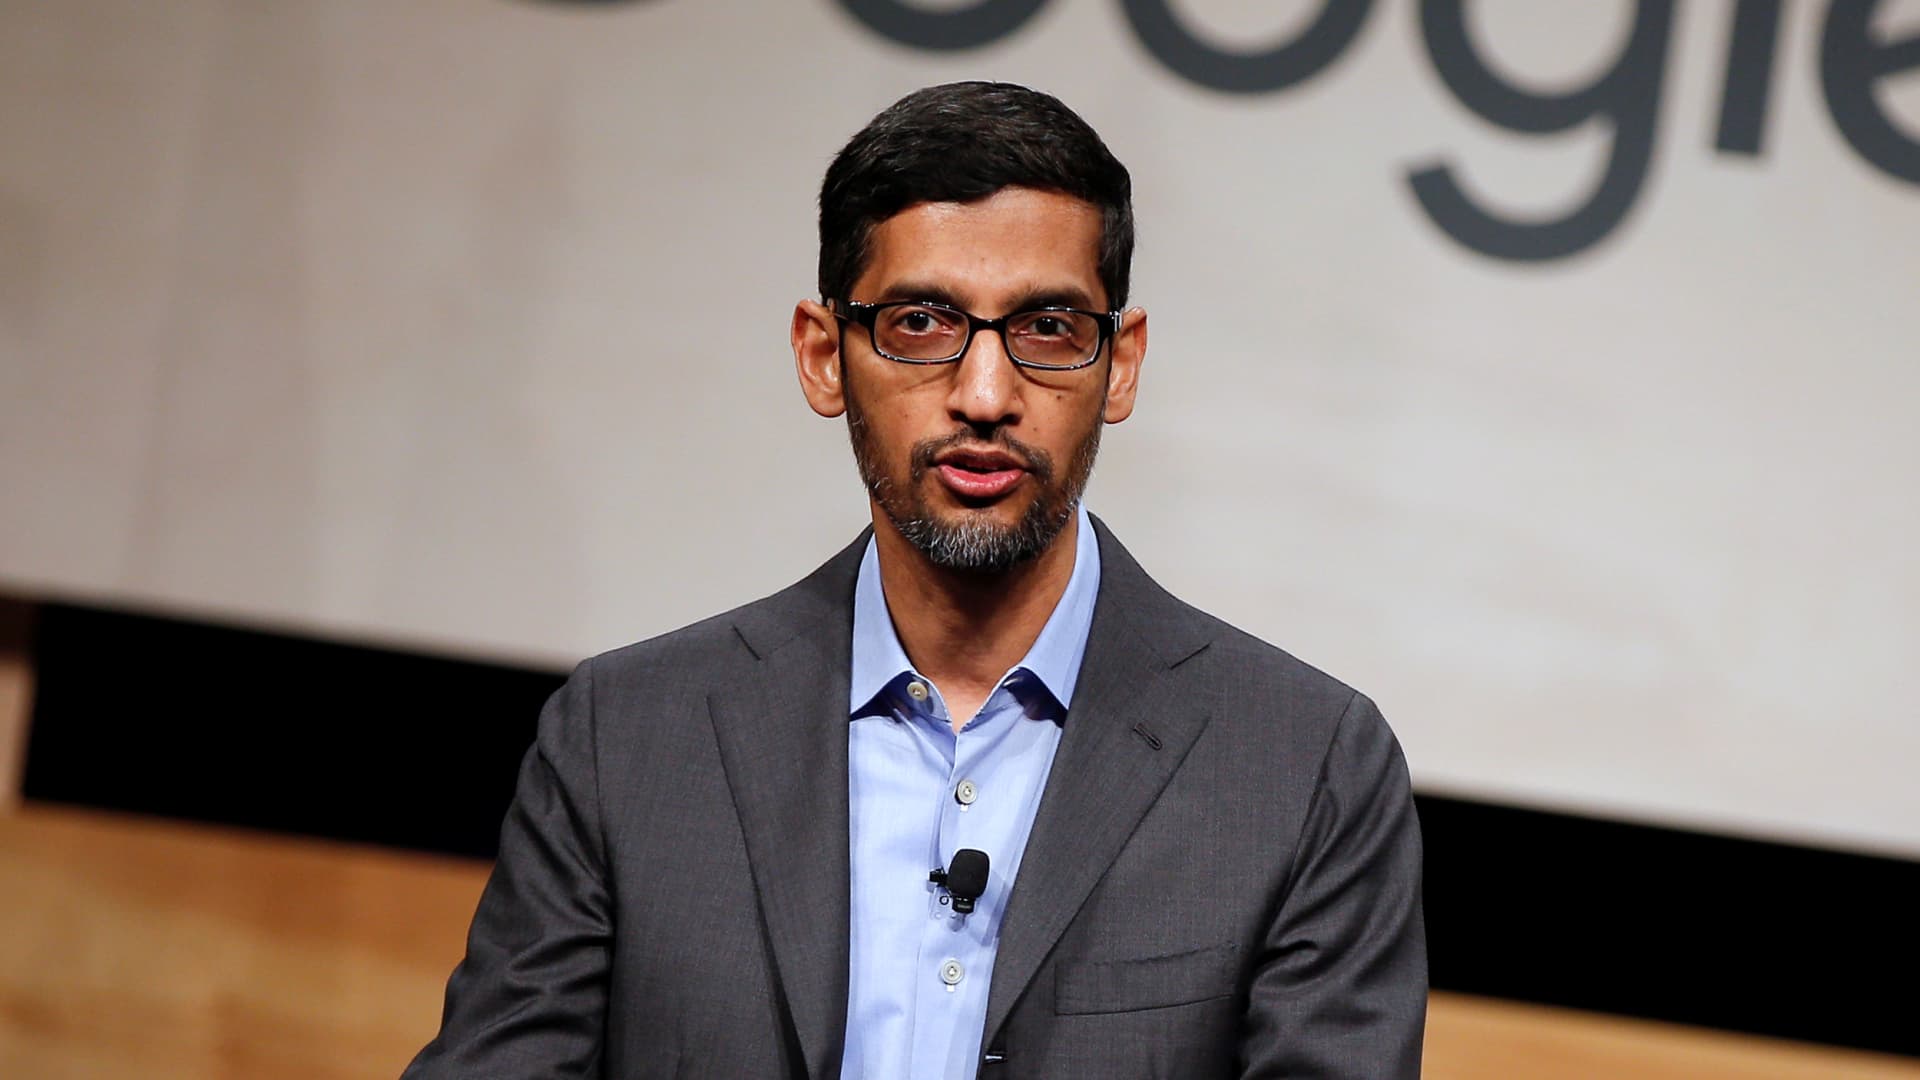 Google CEO Sundar Pichai speaks during signing ceremony committing Google to help expand information technology education at El Centro College in Dallas, Texas, October 3, 2019.